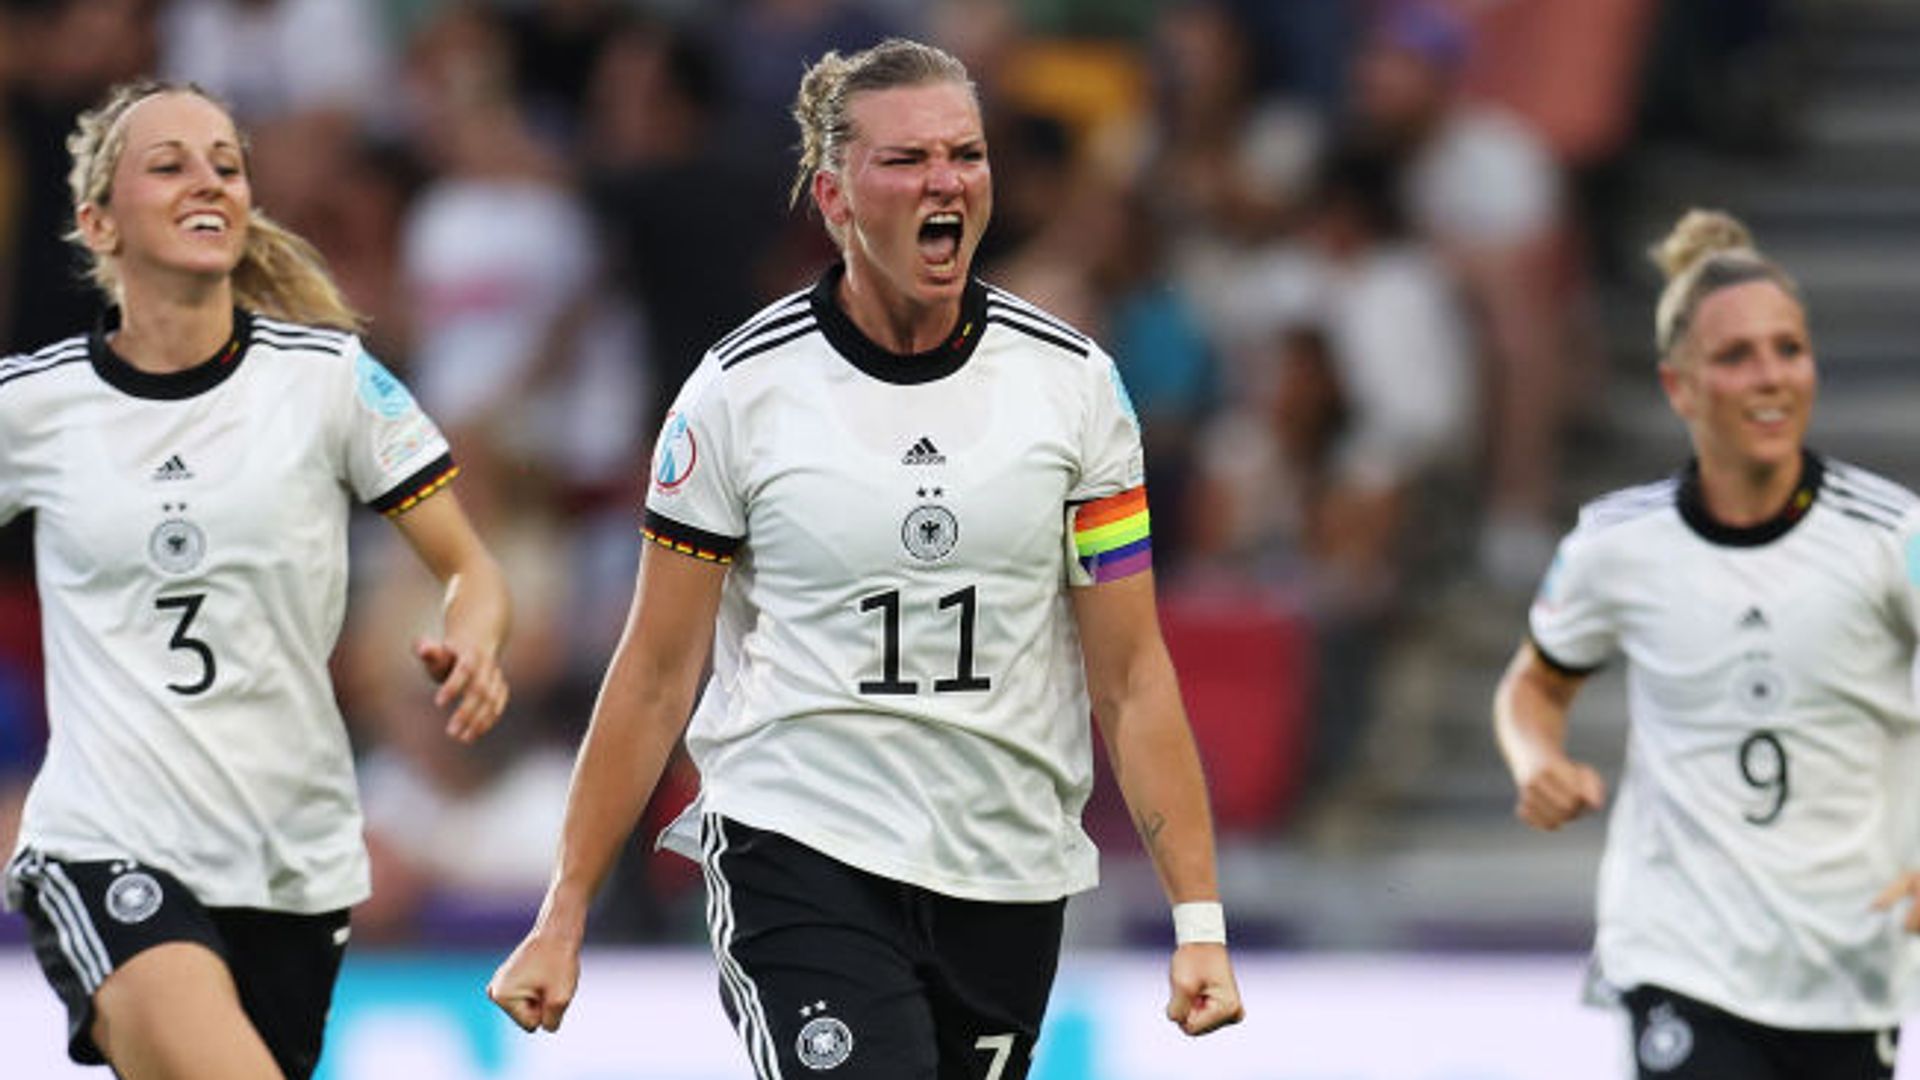 Clinical Germany book spot in Euro quarters after Spain victory